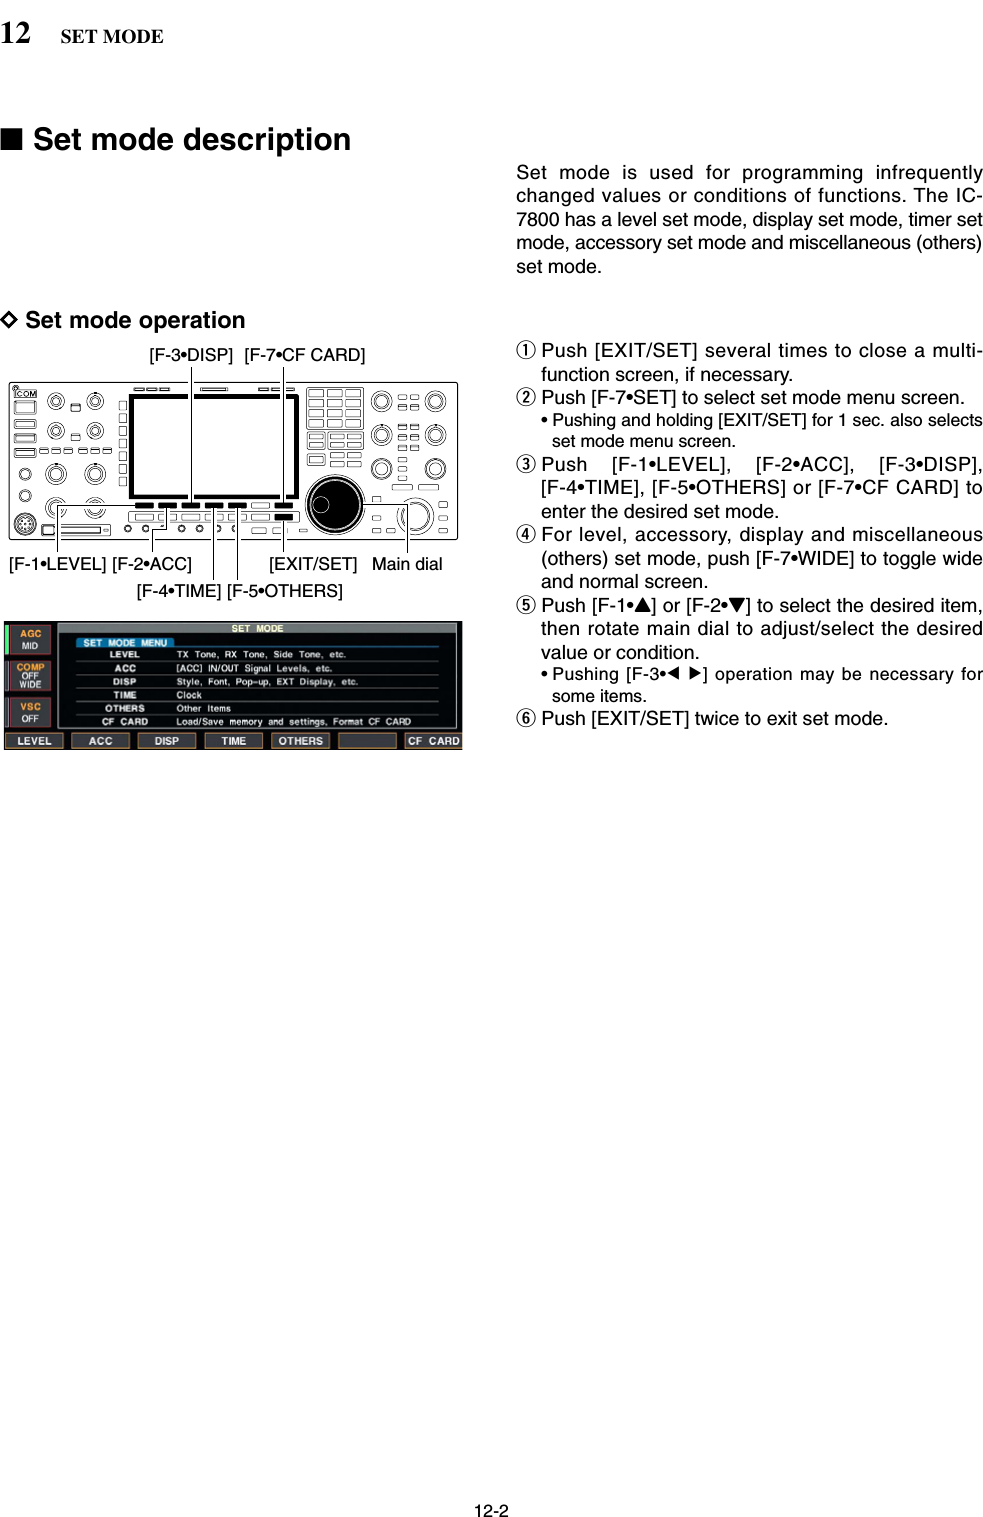 12-2■Set mode descriptionSet mode is used for programming infrequentlychanged values or conditions of functions. The IC-7800 has a level set mode, display set mode, timer setmode, accessory set mode and miscellaneous (others)set mode.DSet mode operationqPush [EXIT/SET] several times to close a multi-function screen, if necessary.wPush [F-7•SET] to select set mode menu screen.• Pushing and holding [EXIT/SET] for 1 sec. also selectsset mode menu screen.ePush [F-1•LEVEL], [F-2•ACC], [F-3•DISP],[F-4•TIME], [F-5•OTHERS] or [F-7•CF CARD] toenter the desired set mode.rFor level, accessory, display and miscellaneous(others) set mode, push [F-7•WIDE] to toggle wideand normal screen.tPush [F-1•Y] or [F-2•Z] to select the desired item,then rotate main dial to adjust/select the desiredvalue or condition.• Pushing [F-3•Ω≈] operation may be necessary forsome items.yPush [EXIT/SET] twice to exit set mode.[F-1•LEVEL] [F-2•ACC][F-3•DISP][F-5•OTHERS][F-4•TIME][EXIT/SET] Main dial[F-7•CF CARD]12 SET MODE